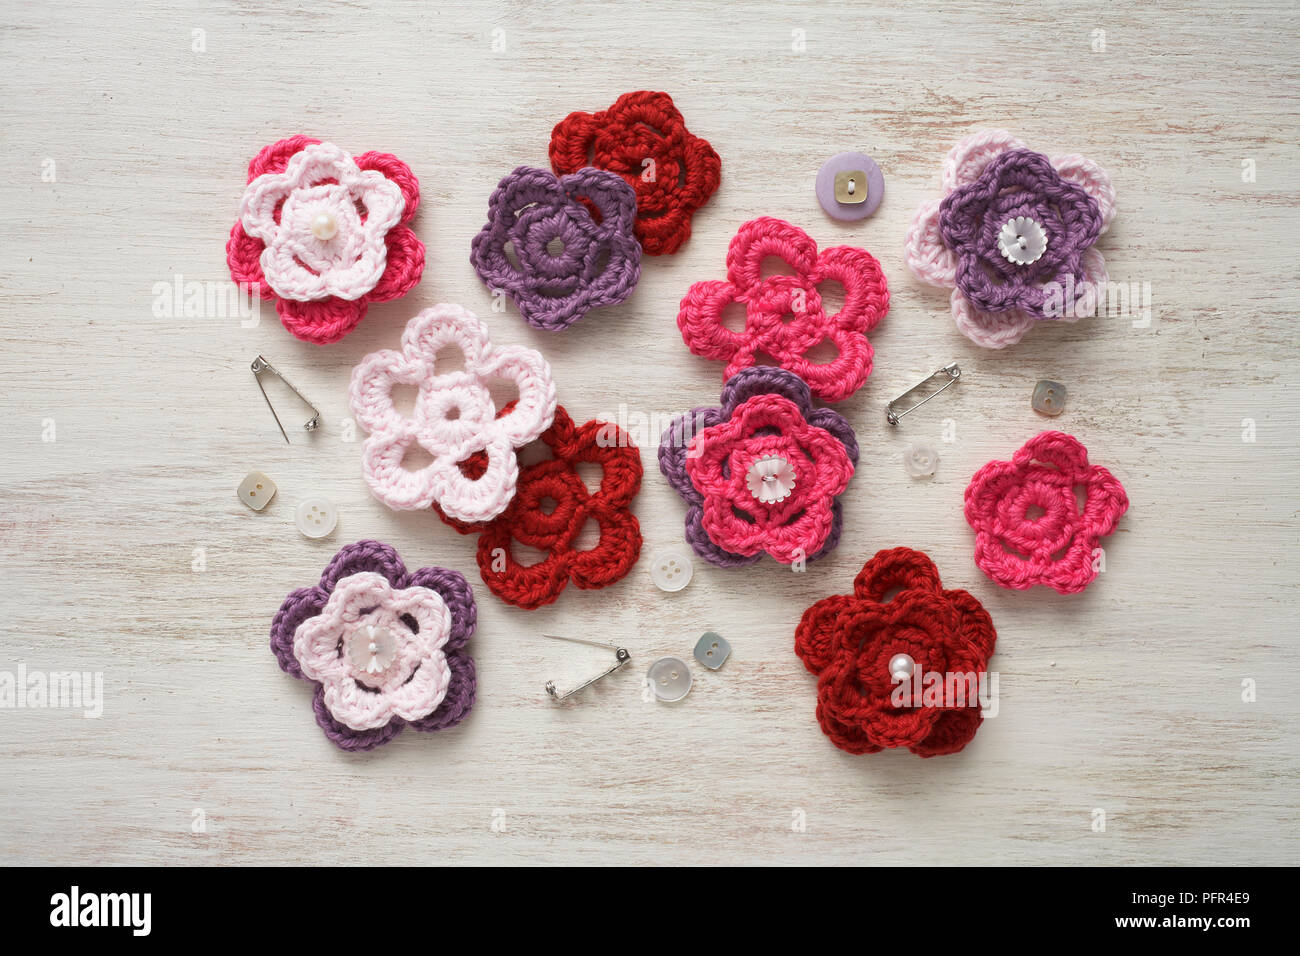 Materials for hand-made crochet flower brooches Stock Photo